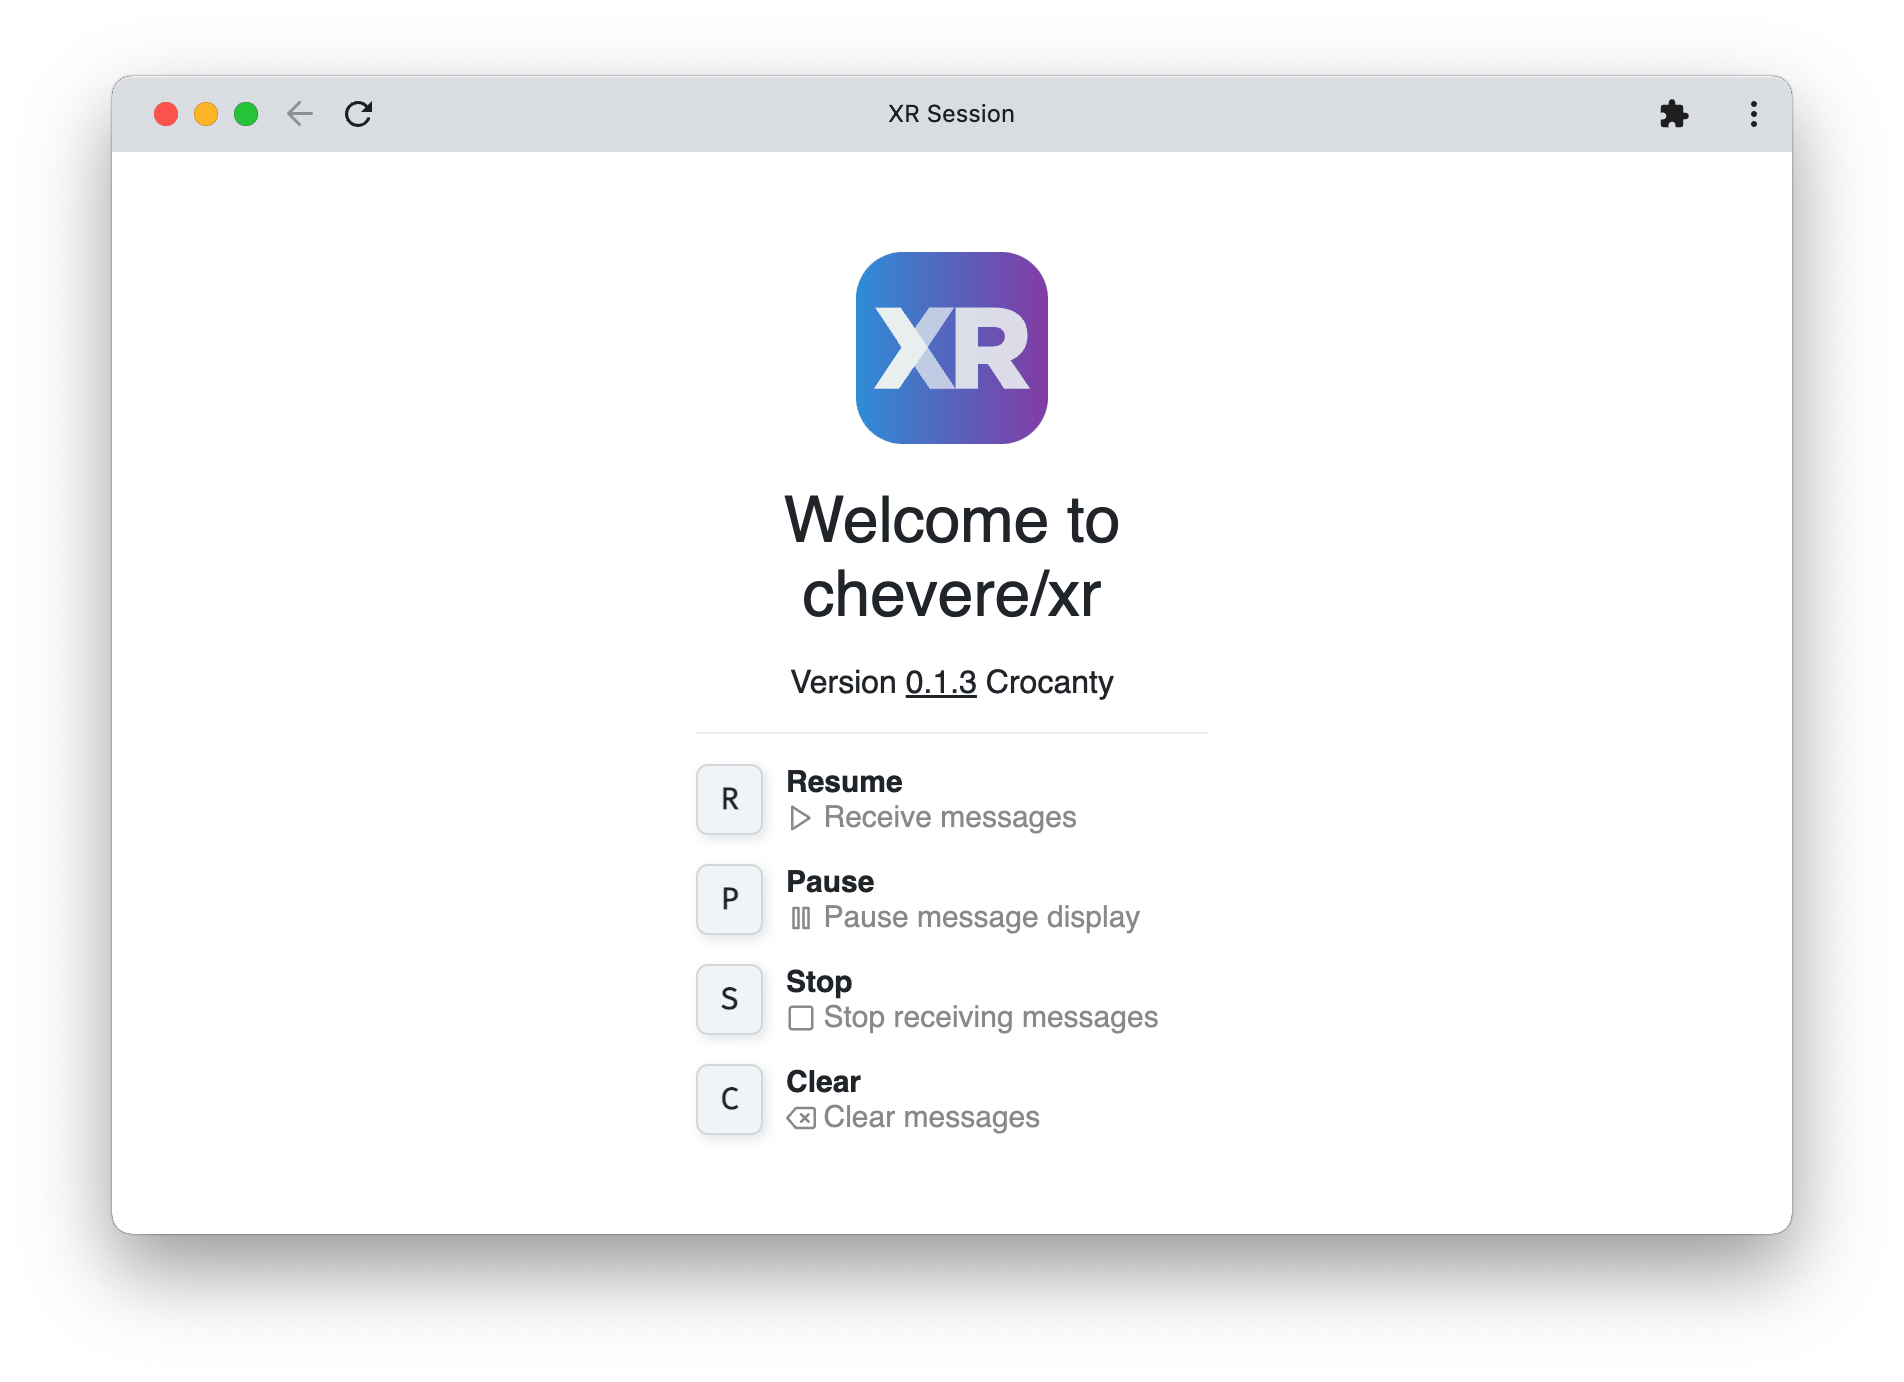 xr-0.1.3-light-welcome.png